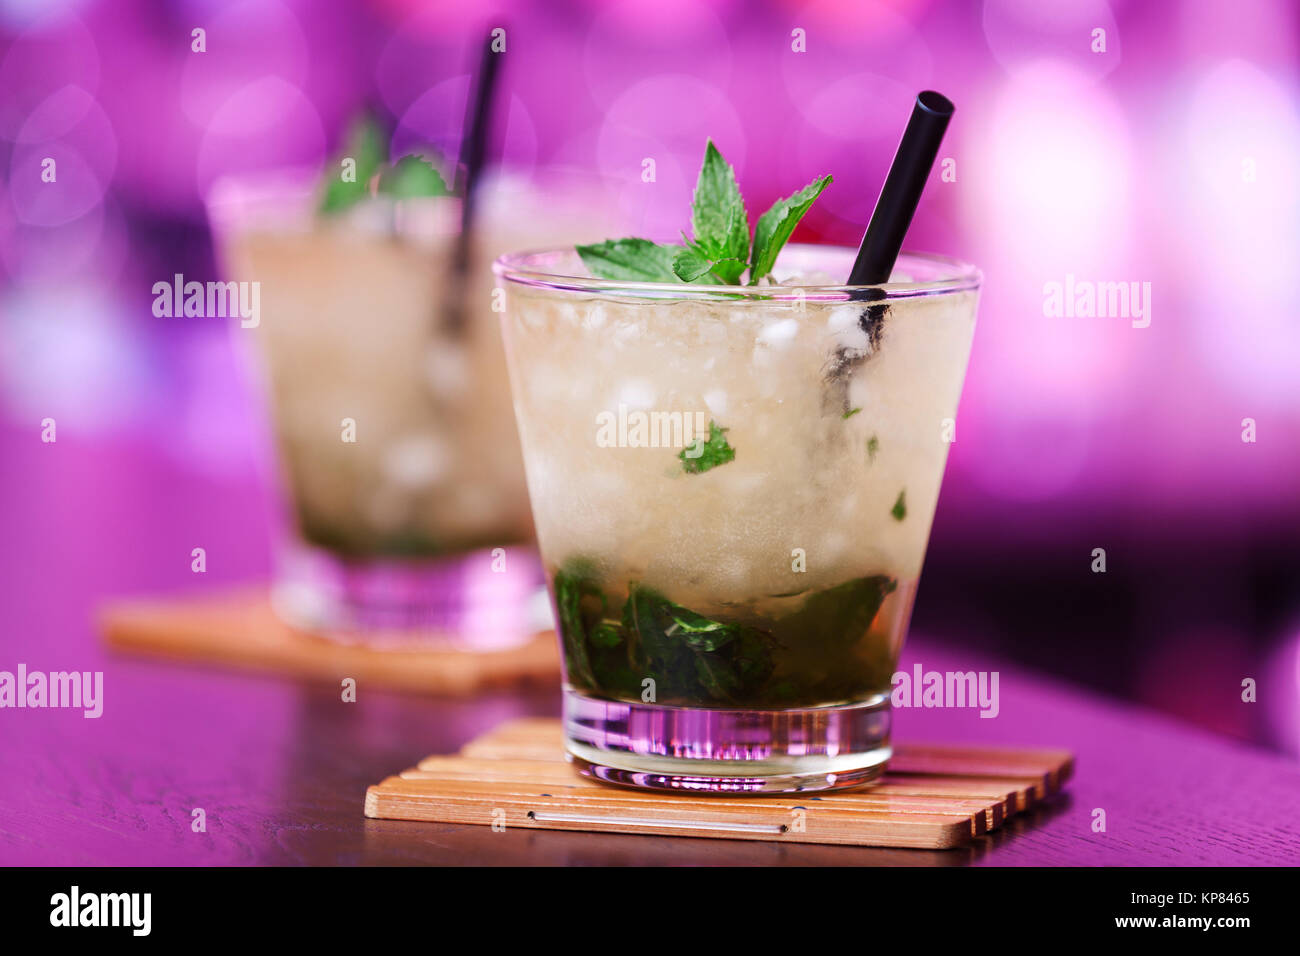 Cocktail collection - Mint Julep,Cocktail collection - Mint Julep,Cocktail collection - Mint Julep,Cocktail collection - Mint Julep Foto Stock